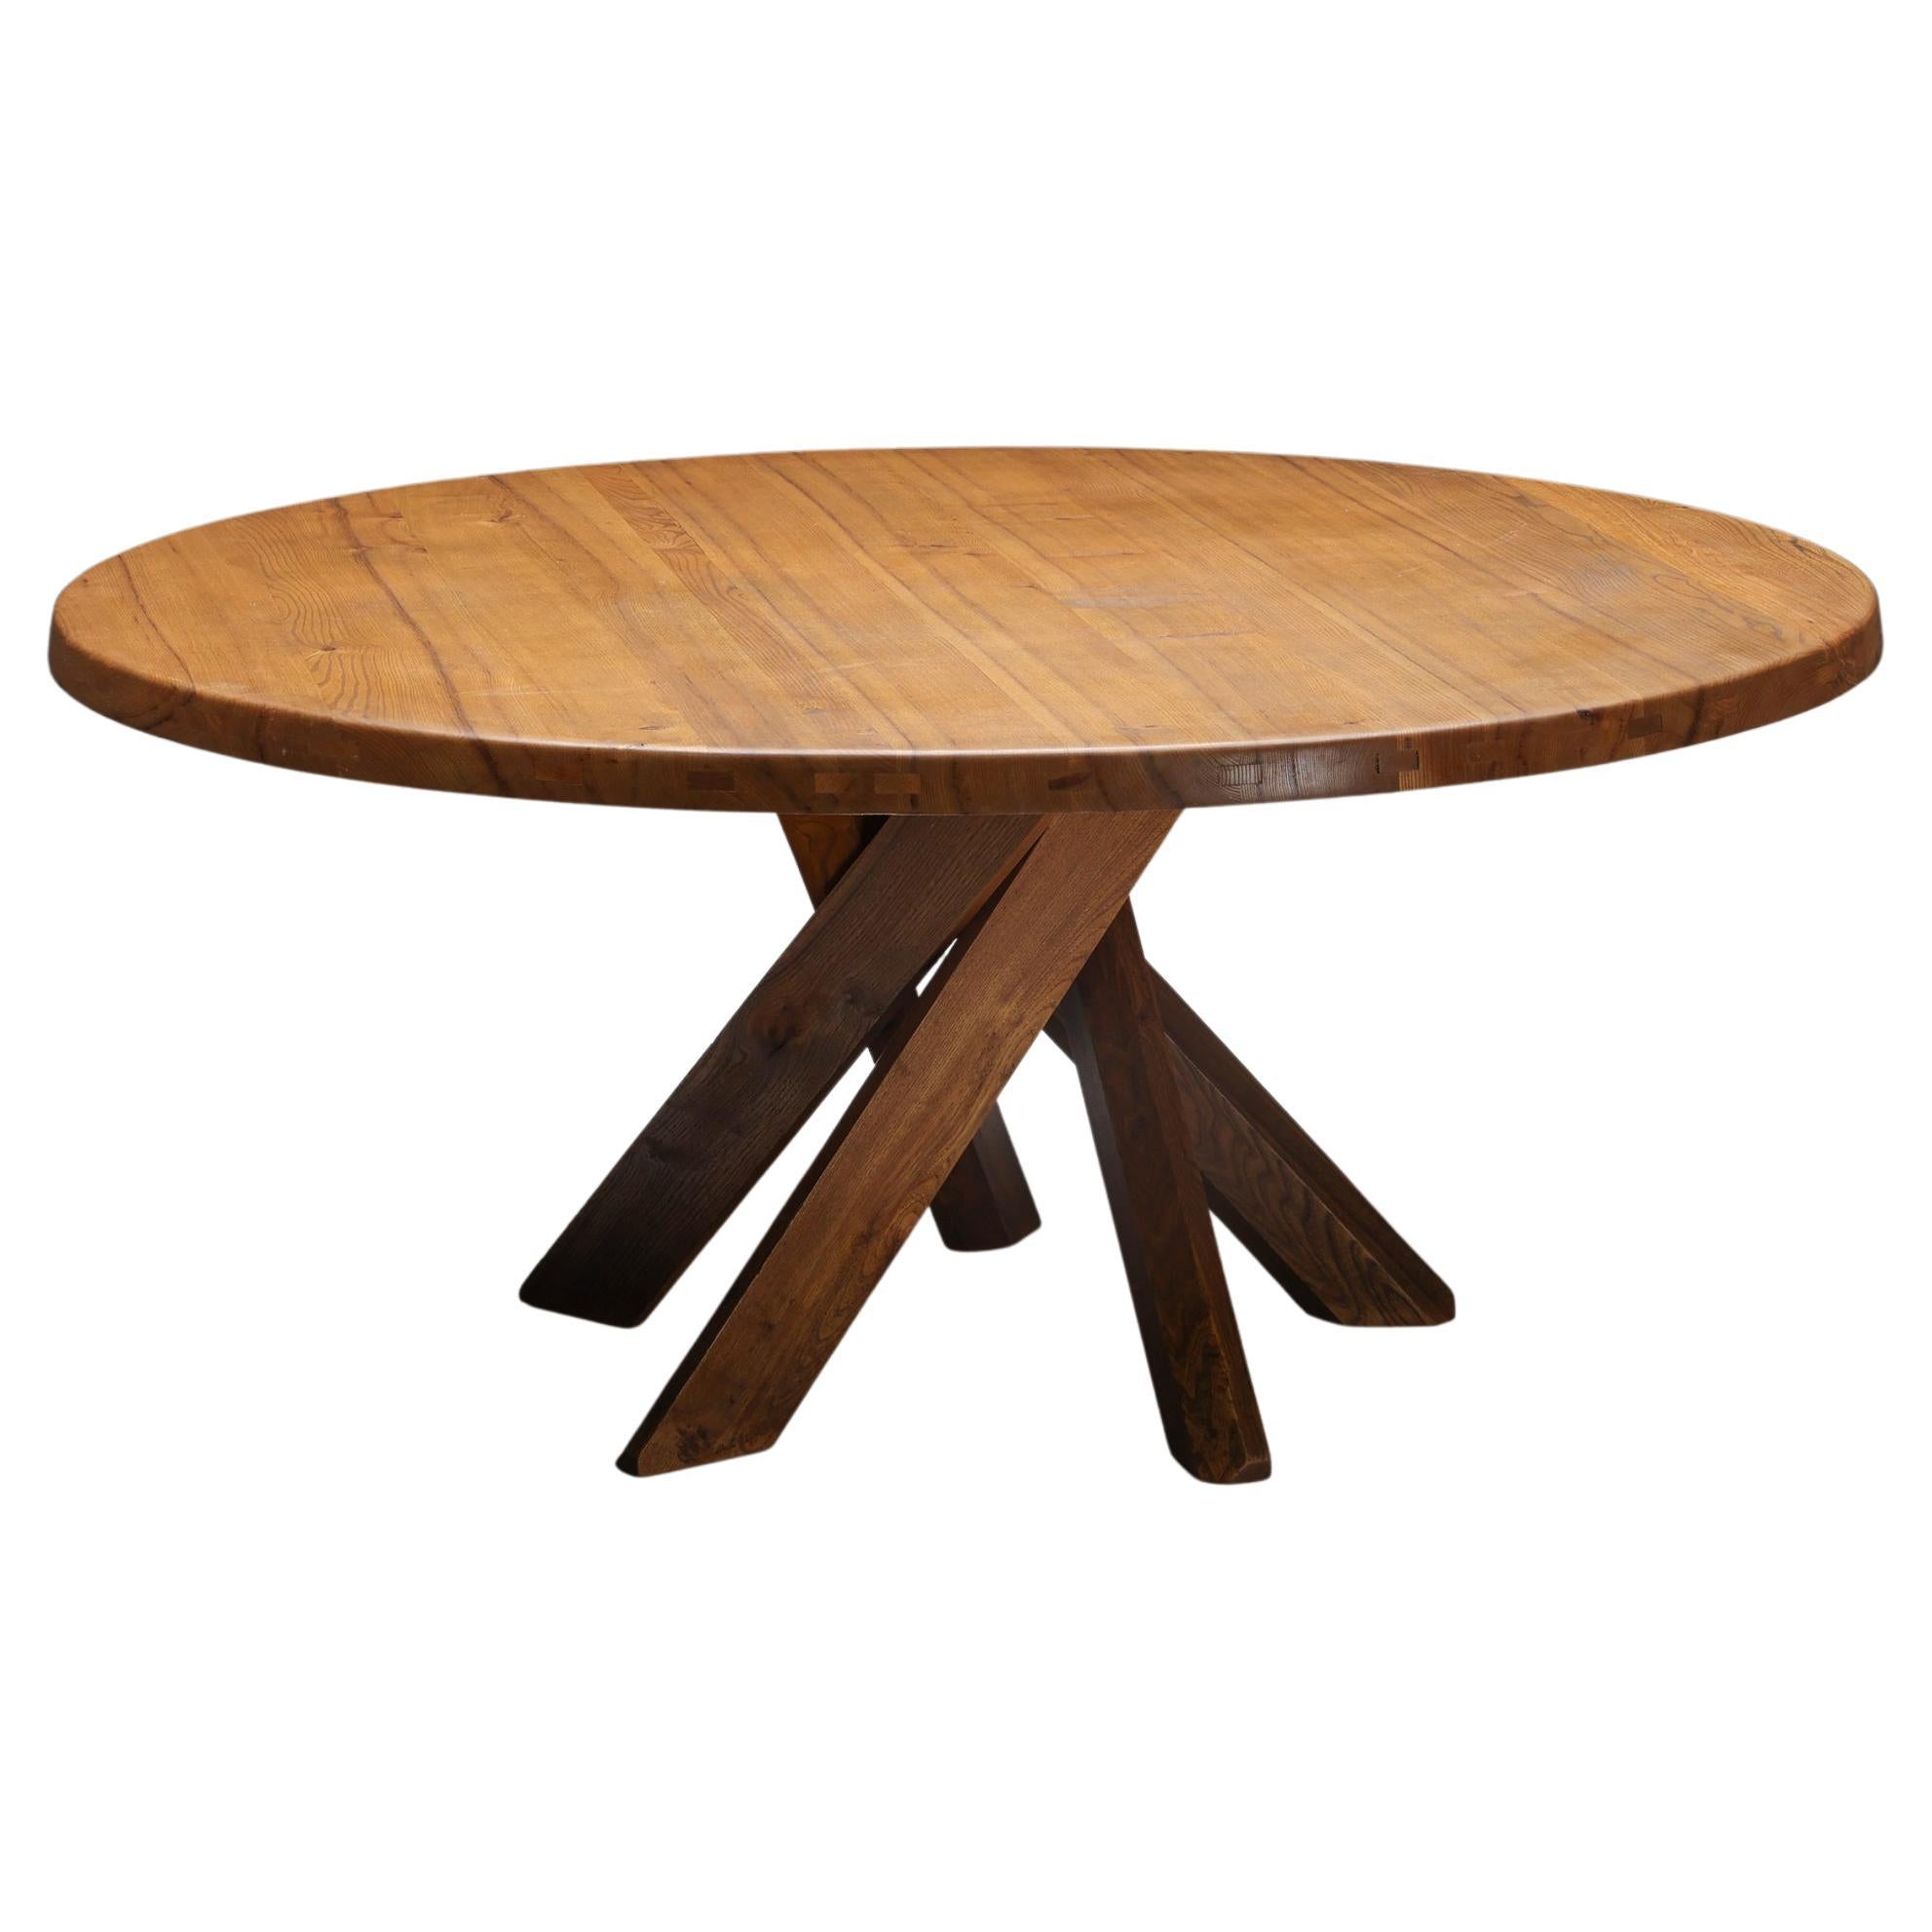 Pierre Chapo 'T21' Round Dining Table in Solid Elm, France, 1973